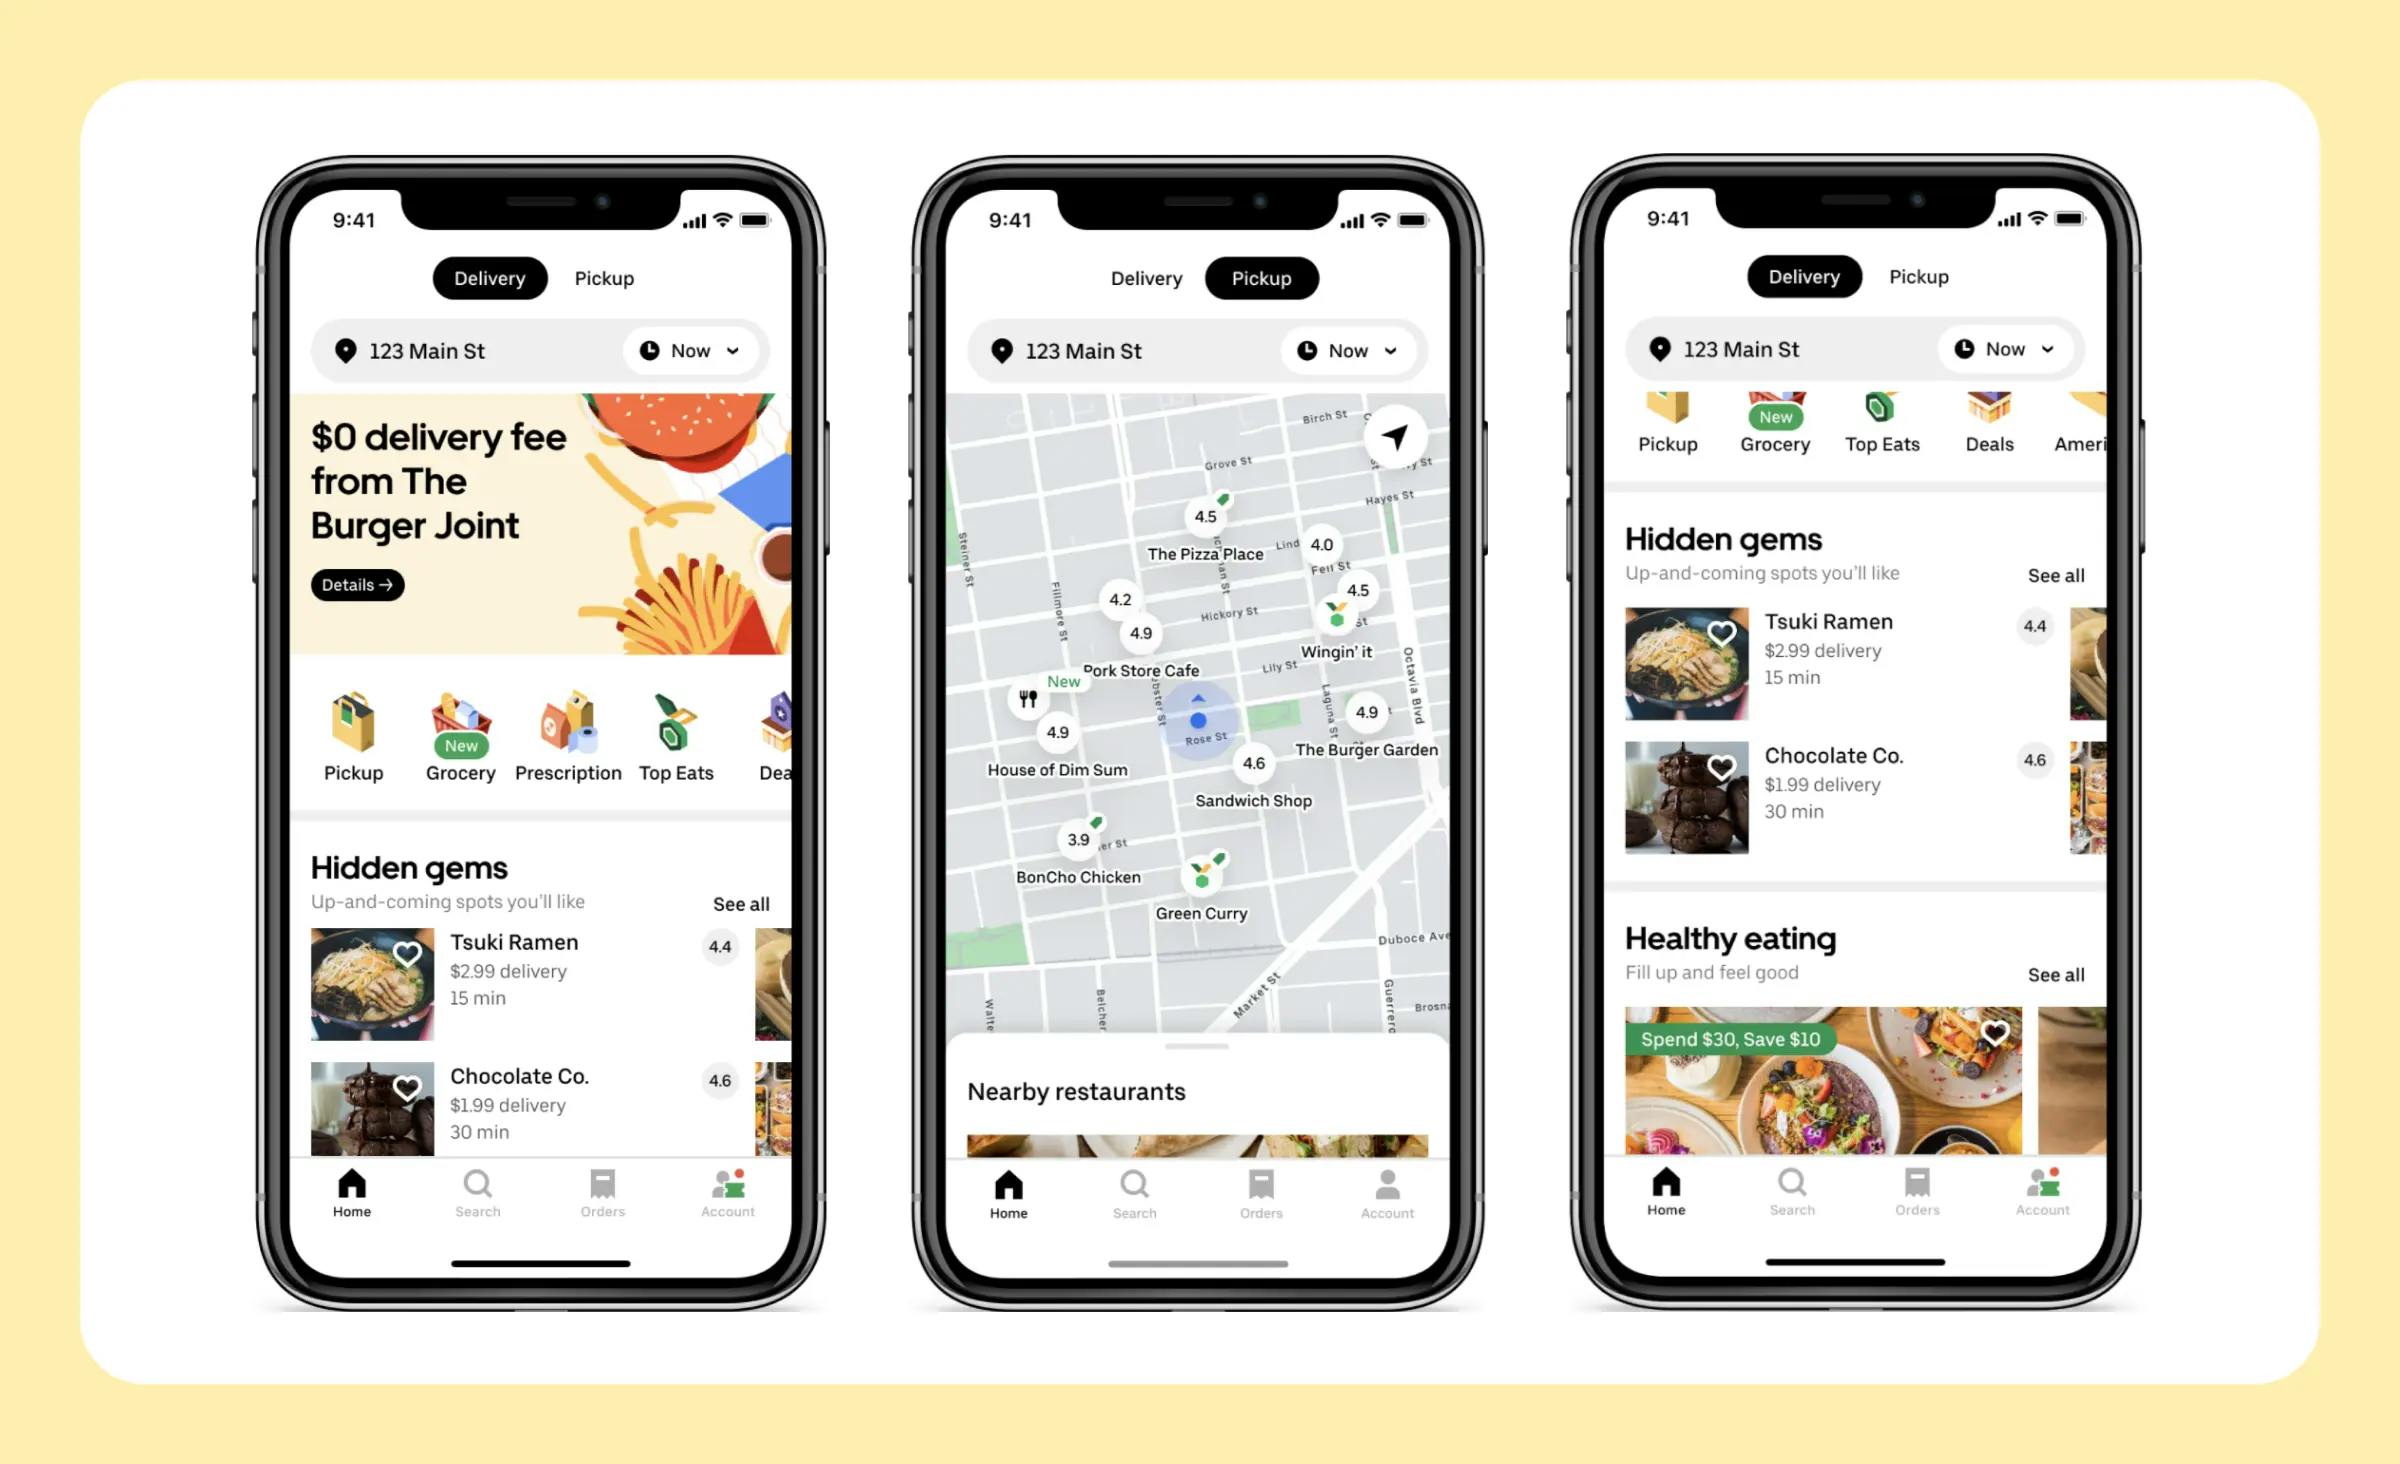 An image shows three screens of the Uber Eats mobile applications: list of the nearest restaurants, city map, search categories. It shows a good example of a platform-to-consumer food delivery app development.